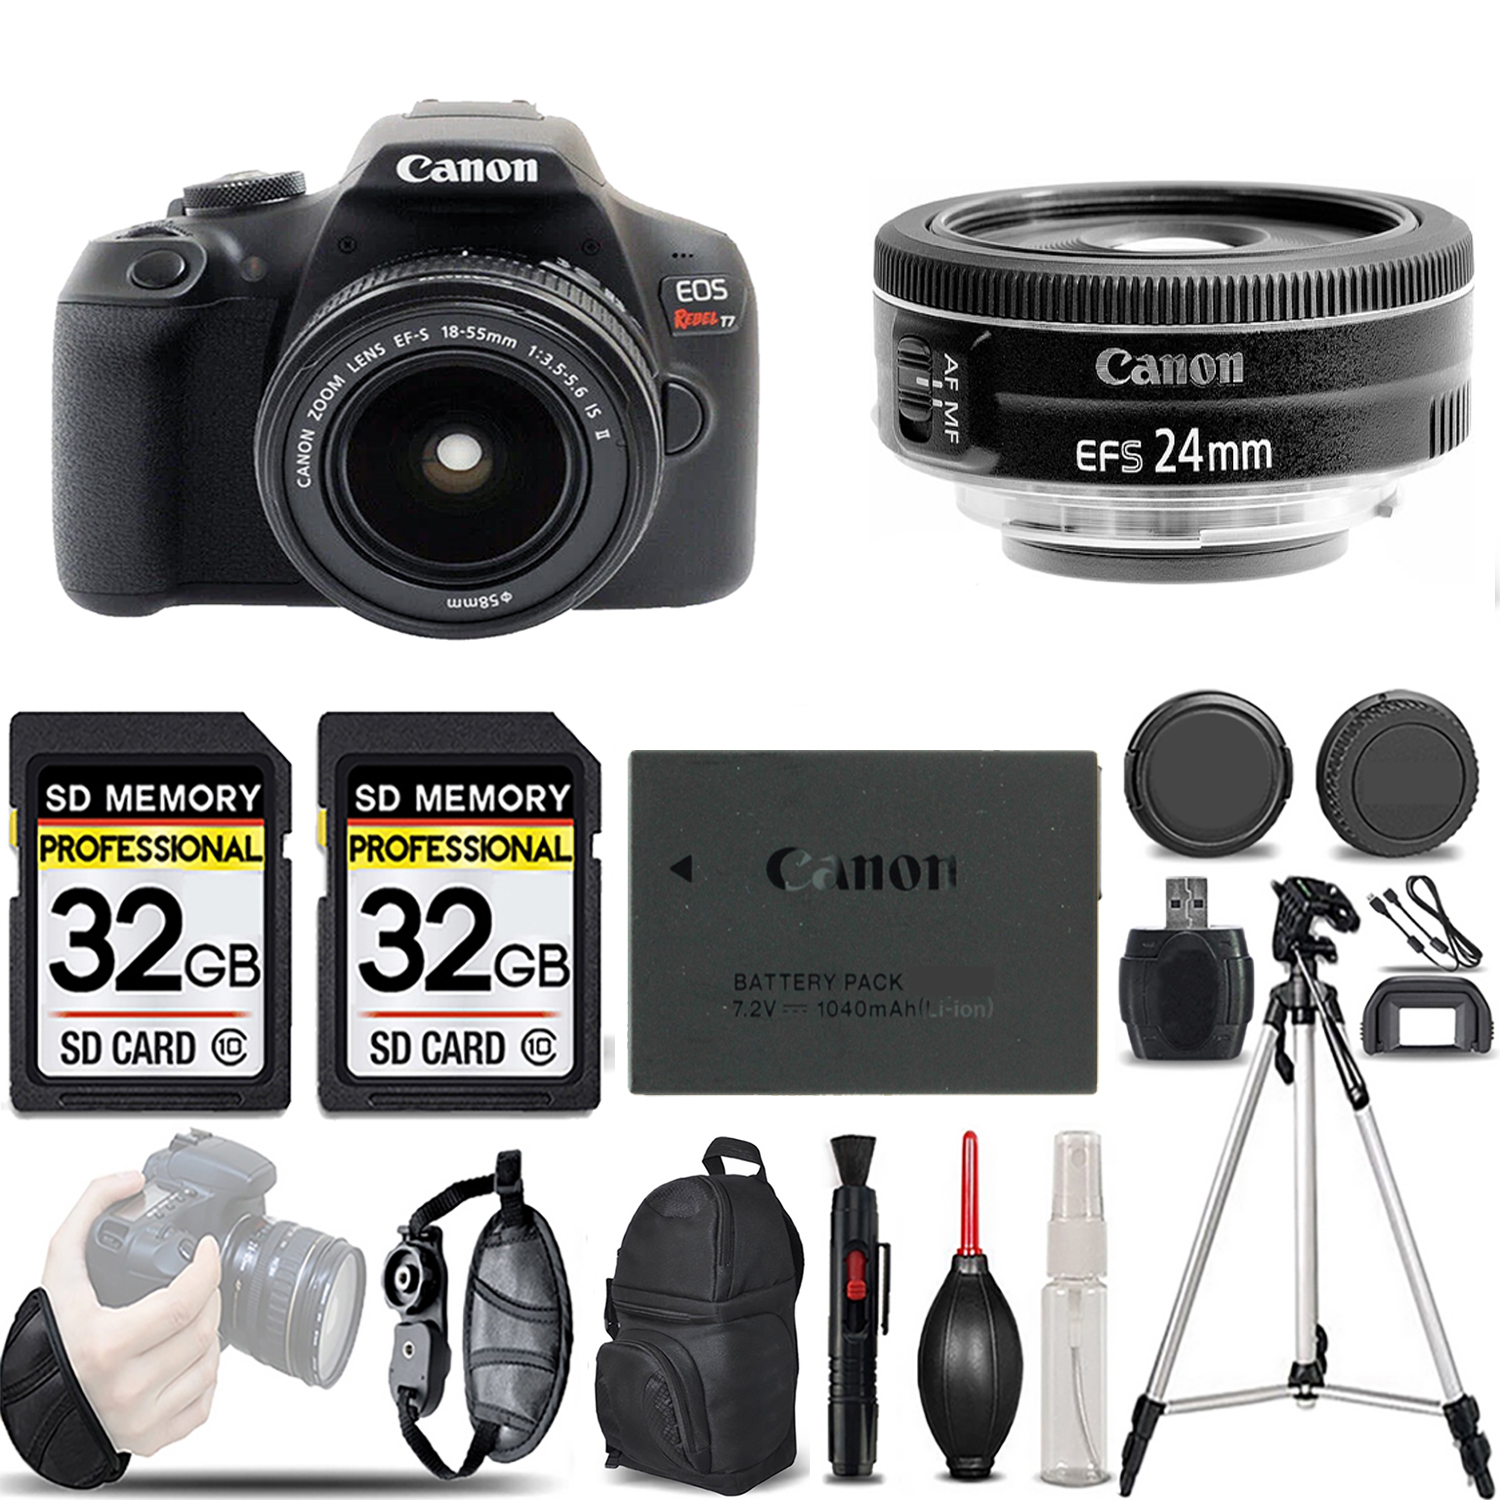 EOS Rebel T7 with 18-55mm Lens + 24mm f/2.8 STM Lens - LOADED KIT *FREE SHIPPING*